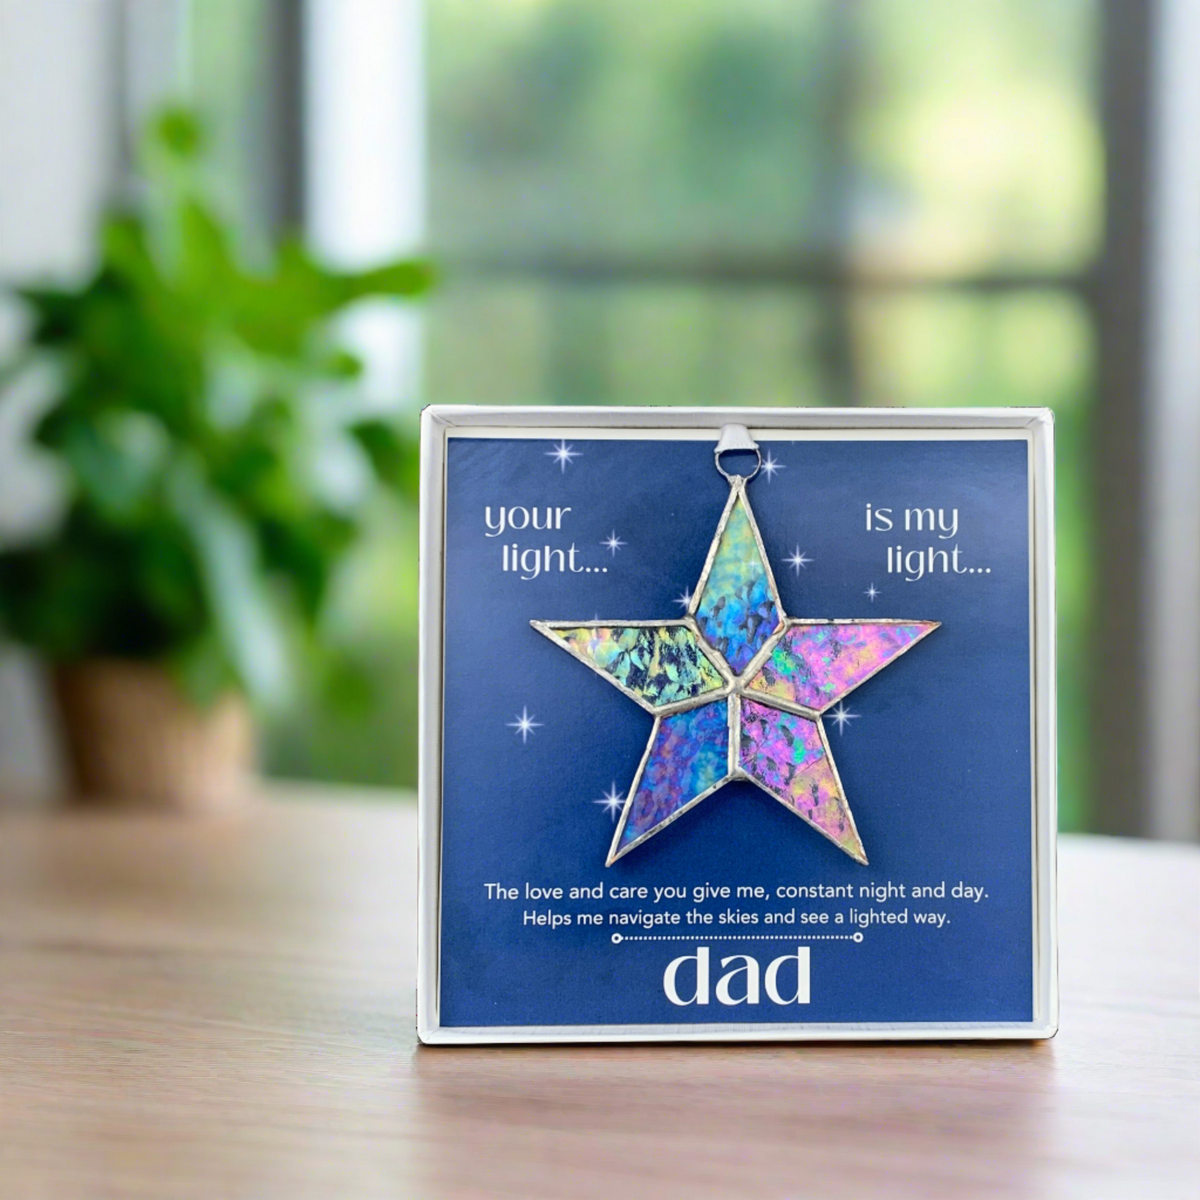 Gift for dad with meaningful sentiment.